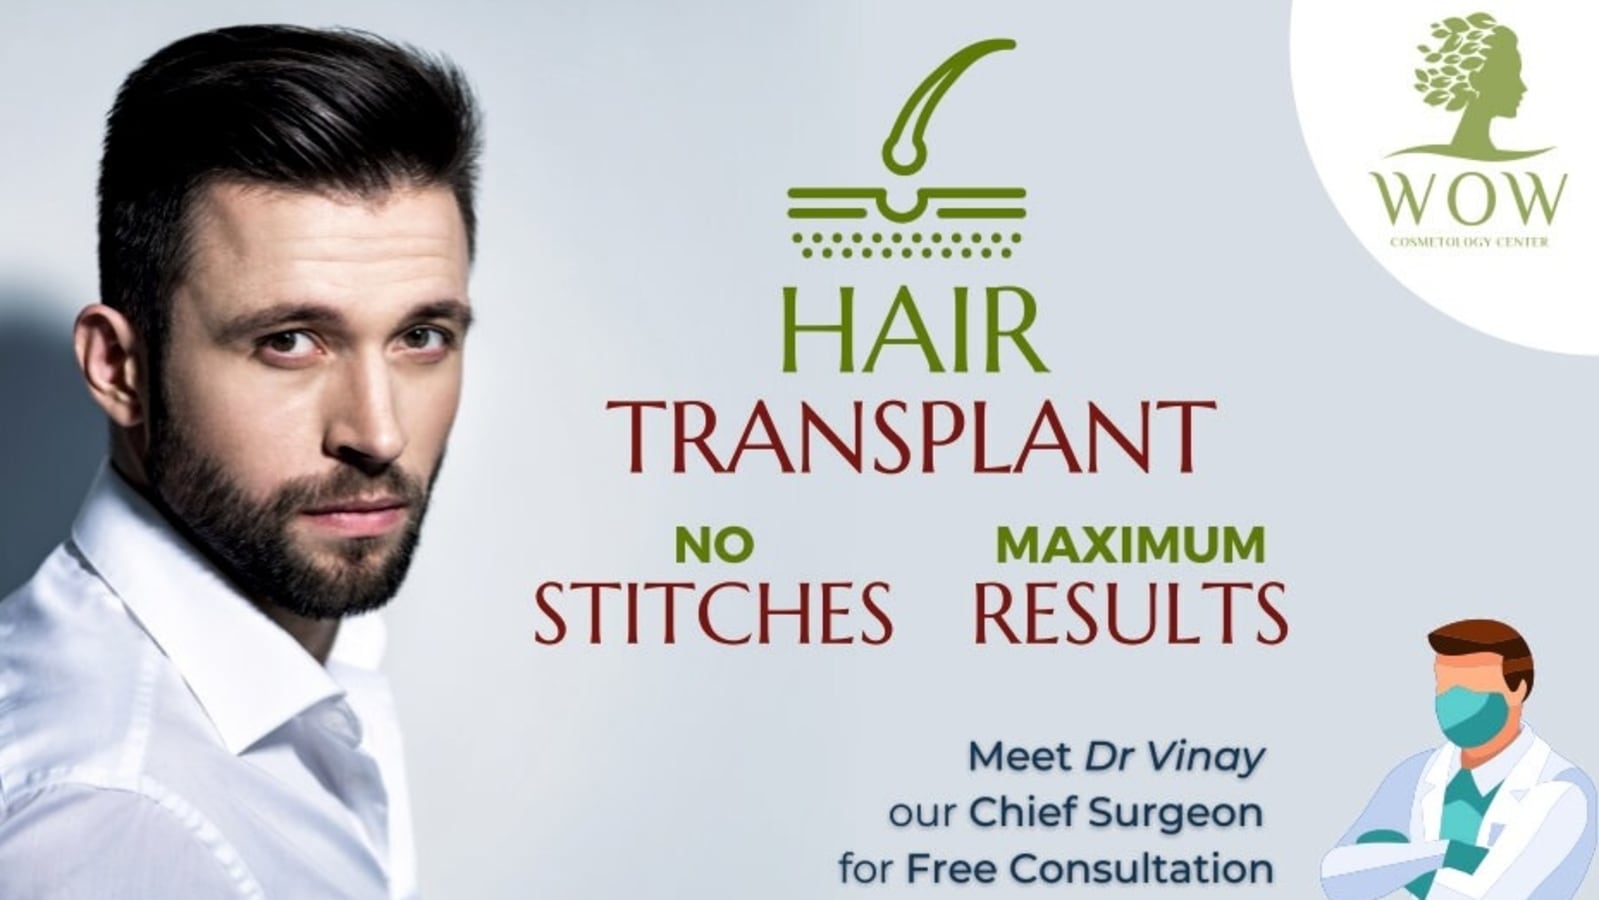 List Of Best Hair Transplant Doctors in Goa  Best Hair Transplant Clinics   Book Appointment Online  Justdial